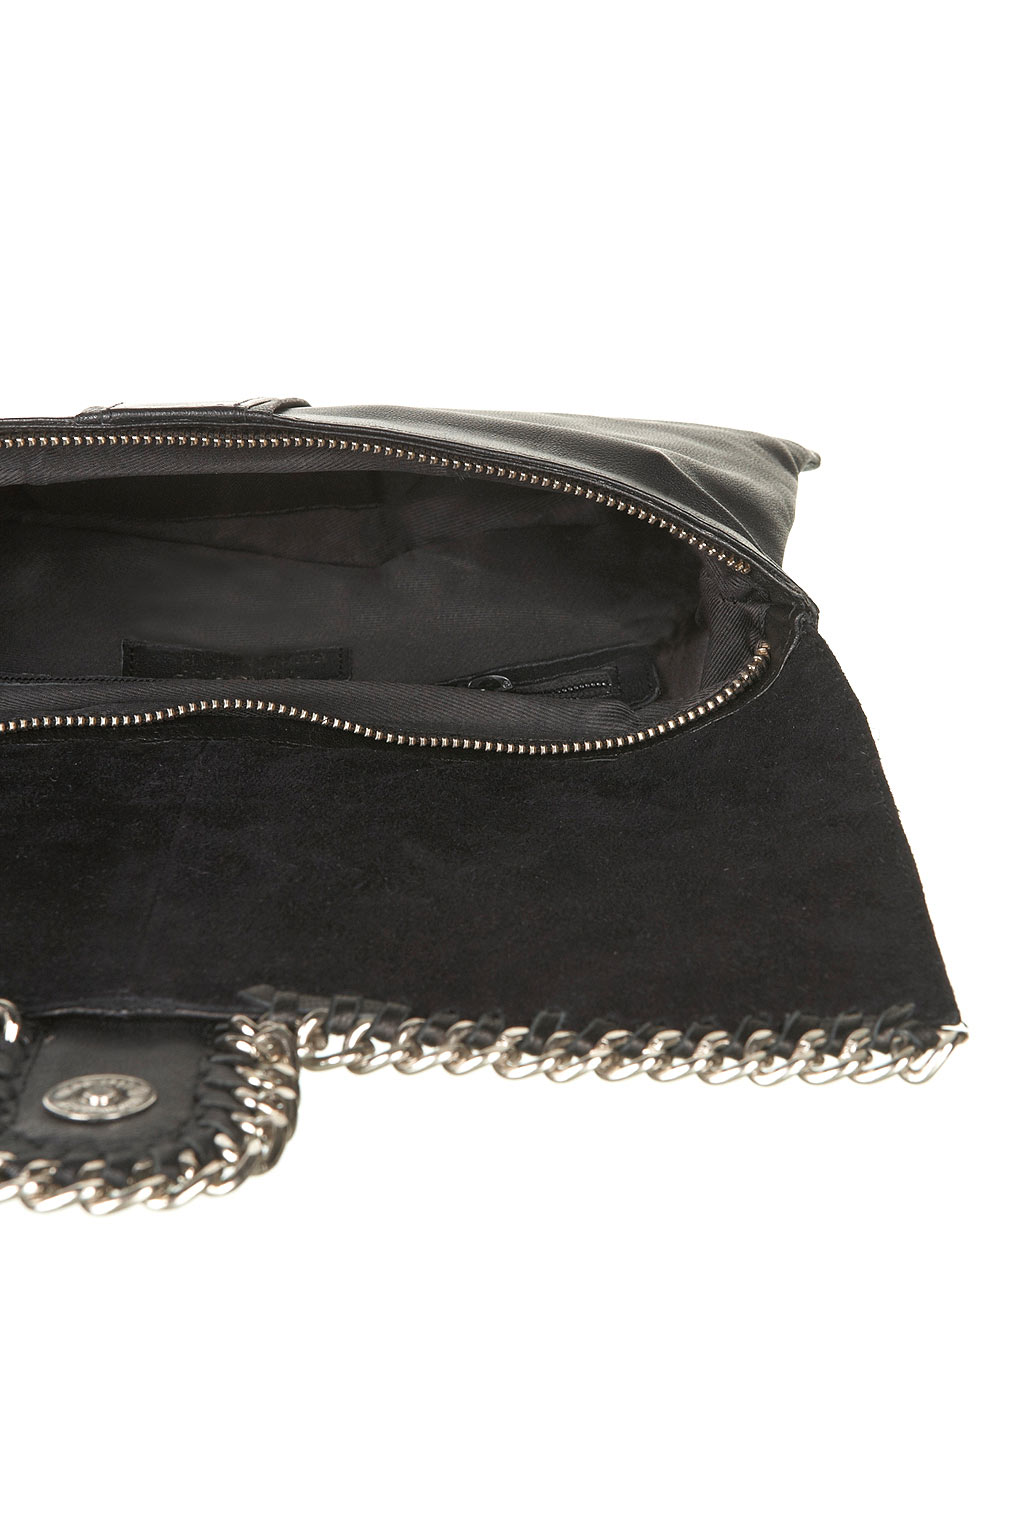 TOPSHOP Leather Quilted Chain Clutch Bag in Black - Lyst